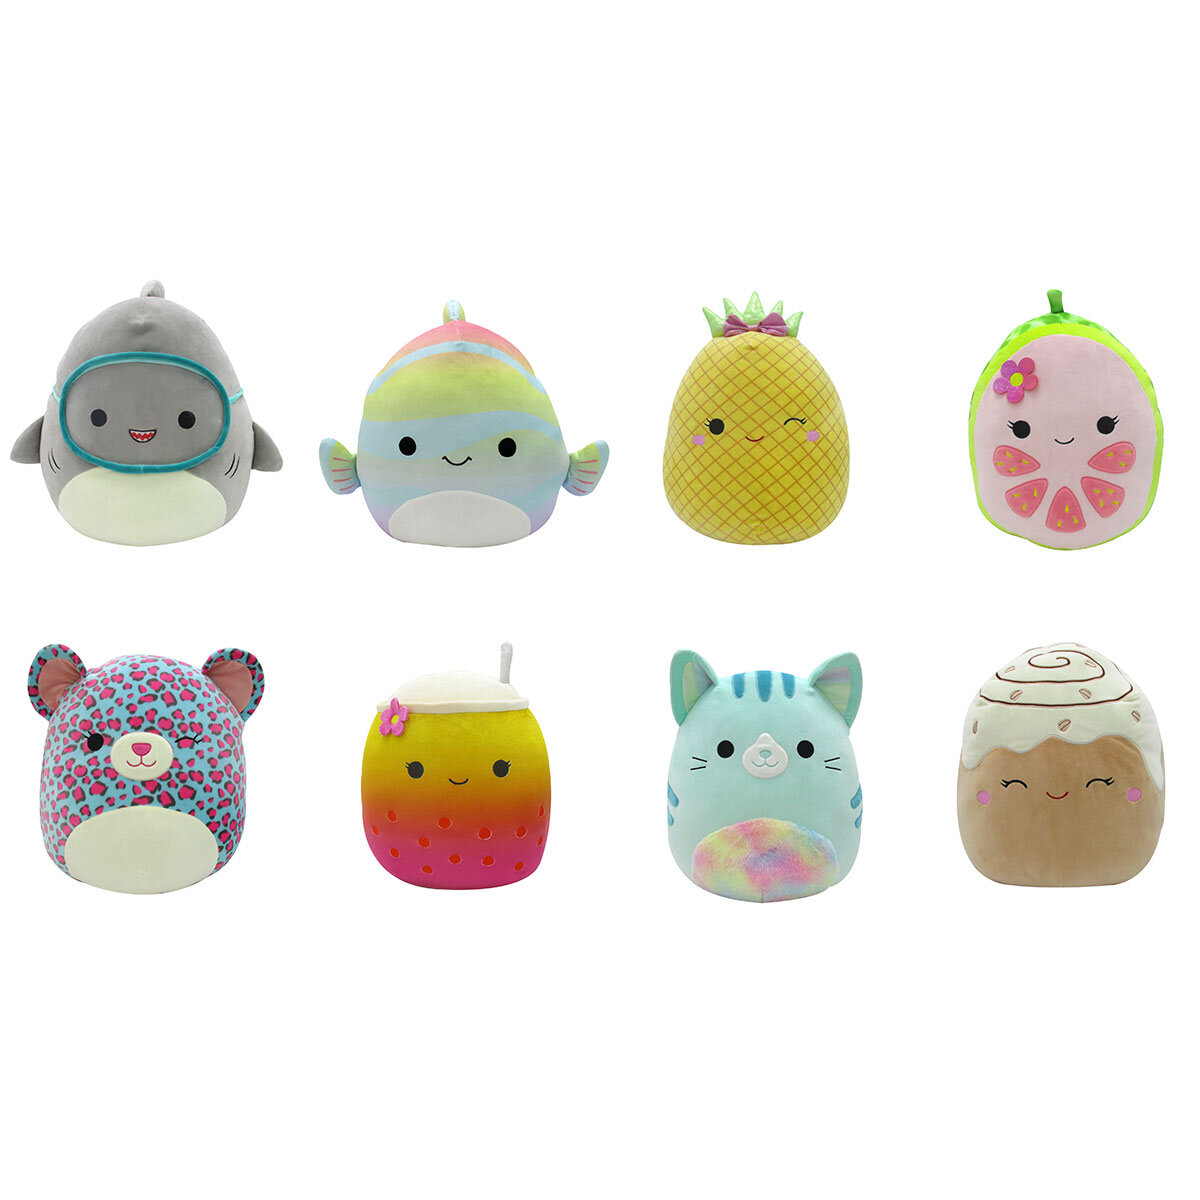 Squishmallow 16" (40.6cm) Plush Collectable Toy Assortment 4 Pack (3+ Years)